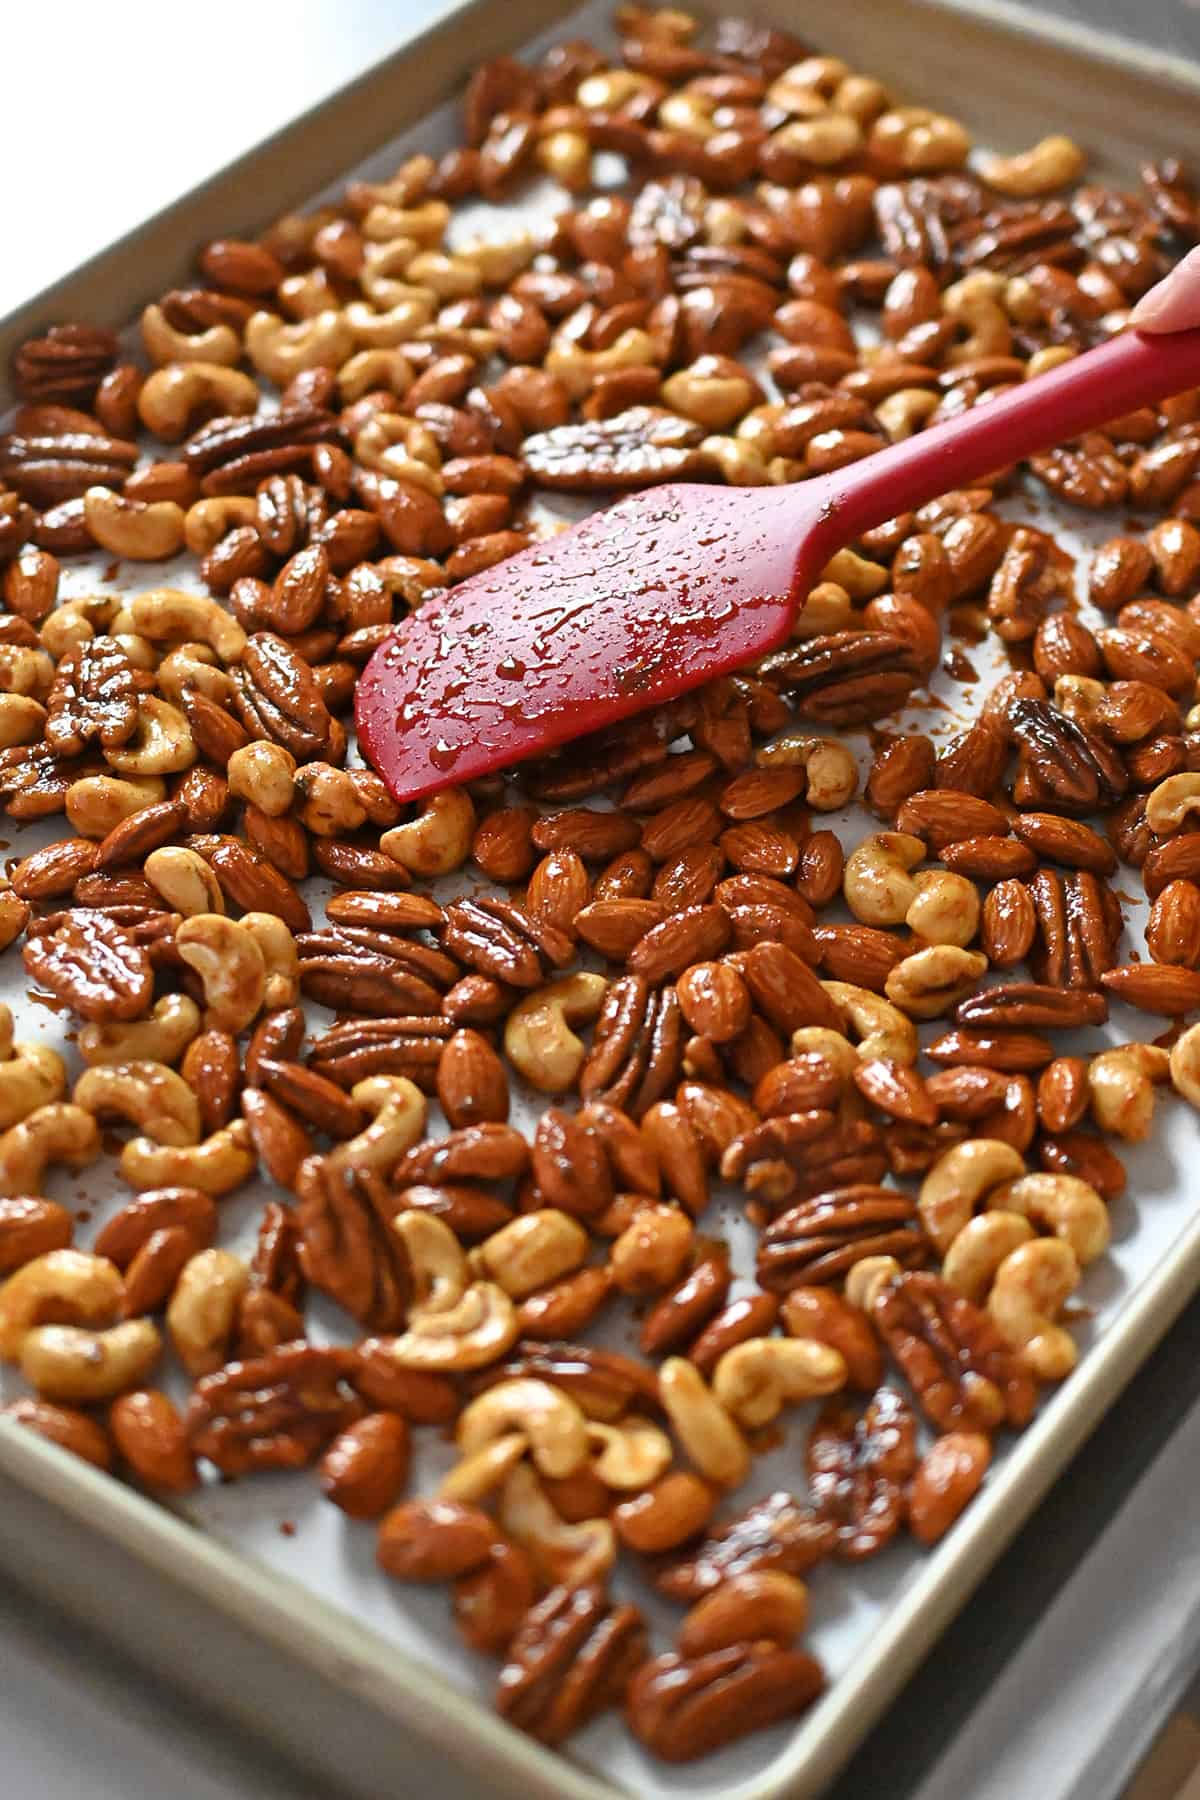 Using a silicone spatula to arrange the seasoned nuts in a single layer on a parchment lined rimmed baking sheet.